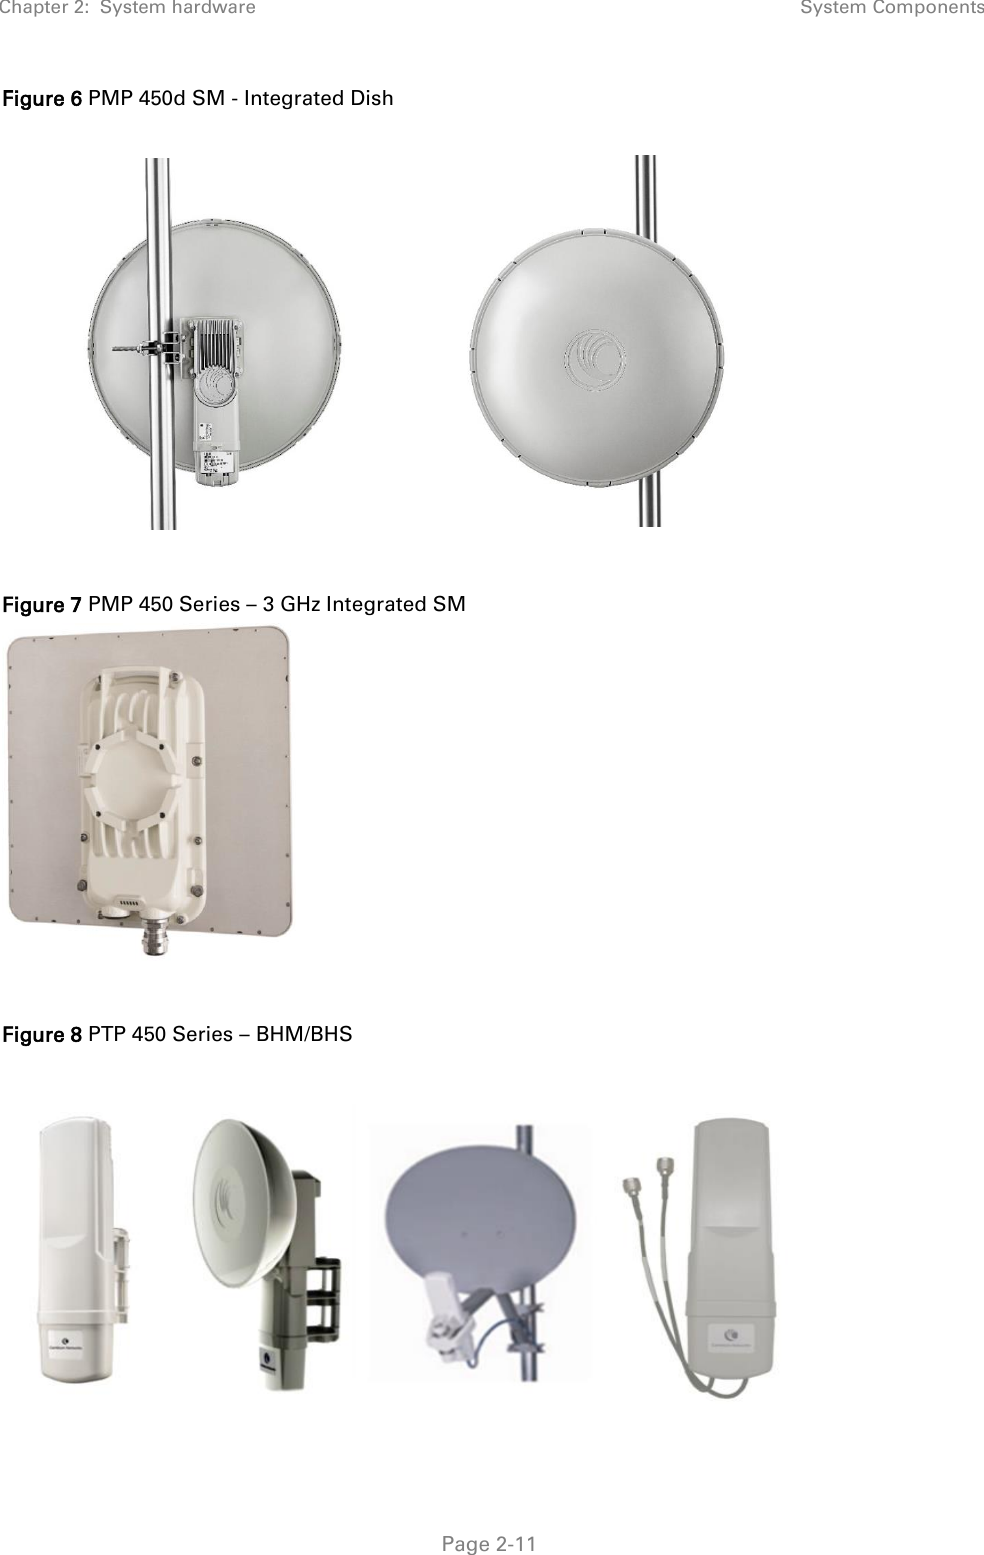 Chapter 2:  System hardware System Components   Page 2-11 Figure 6 PMP 450d SM - Integrated Dish    Figure 7 PMP 450 Series – 3 GHz Integrated SM   Figure 8 PTP 450 Series – BHM/BHS   